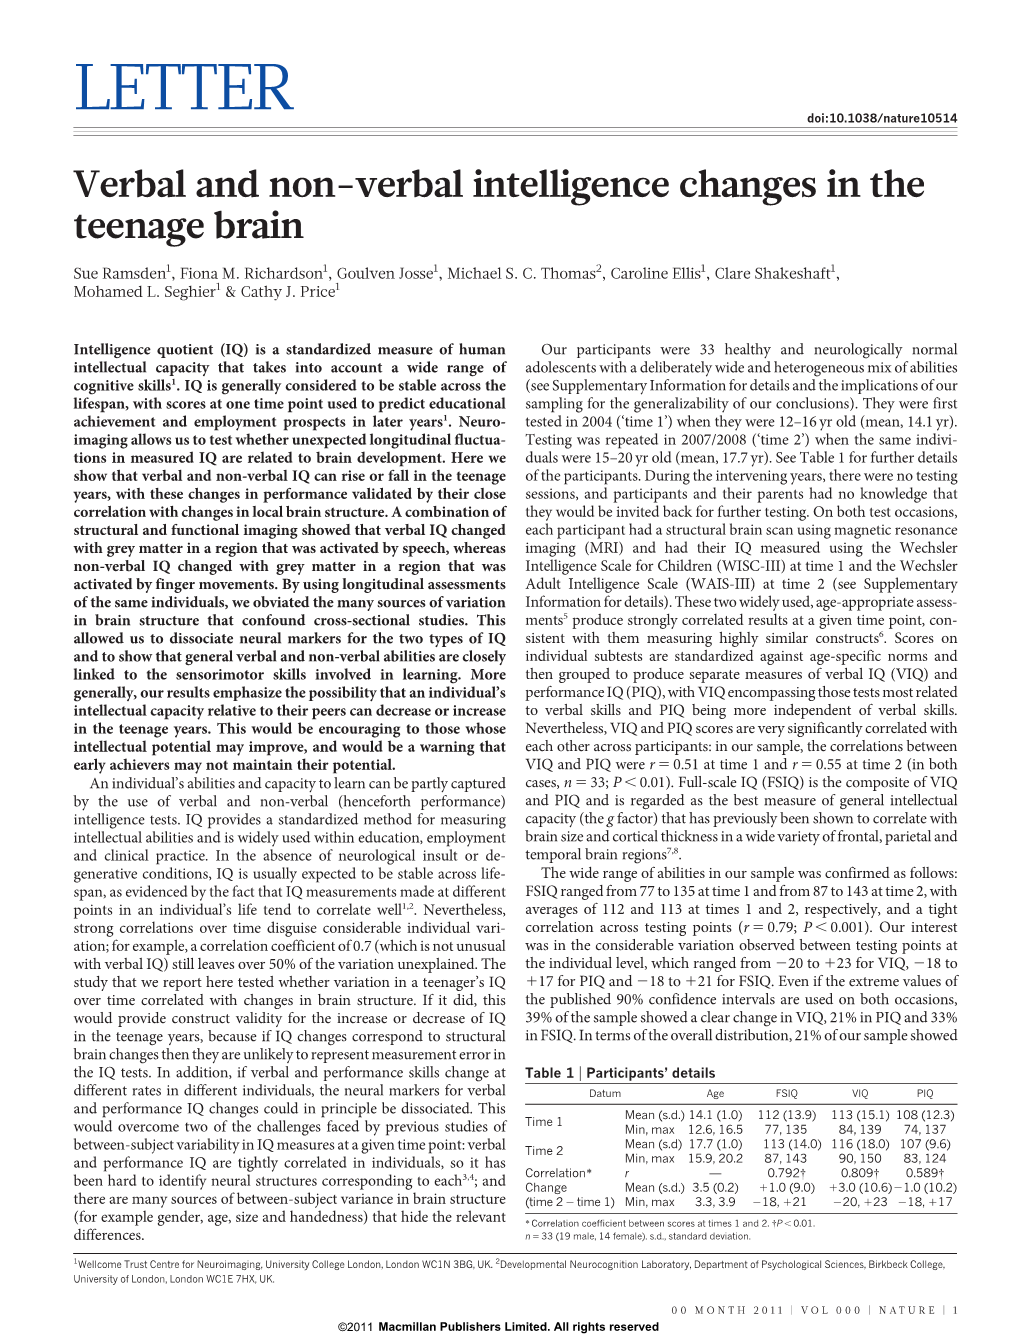 Verbal and Non-Verbal Intelligence Changes in the Teenage Brain